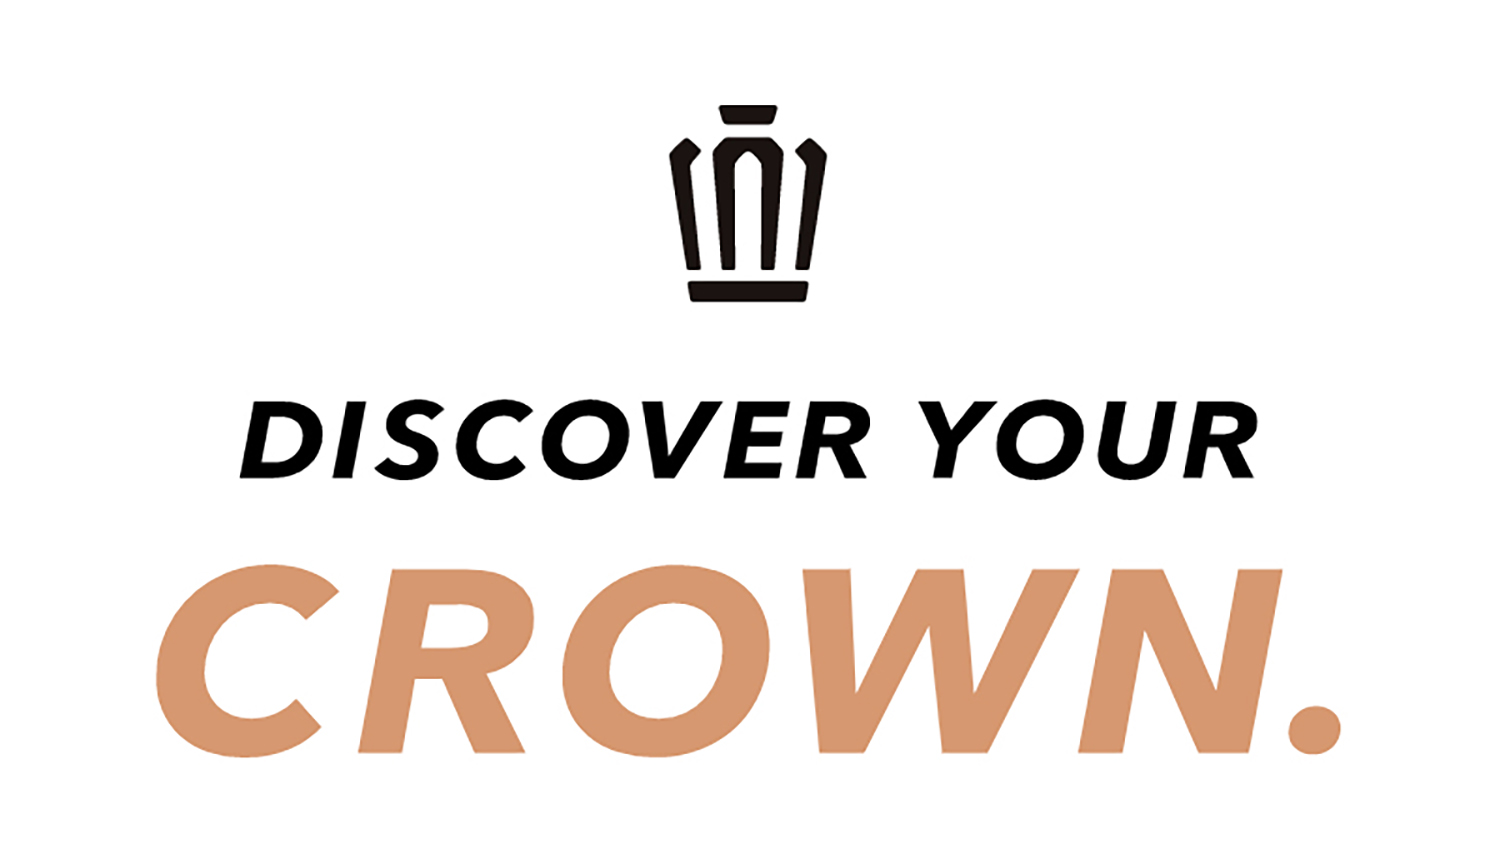 DISCOVER YOUR CROWN 〜 画像1